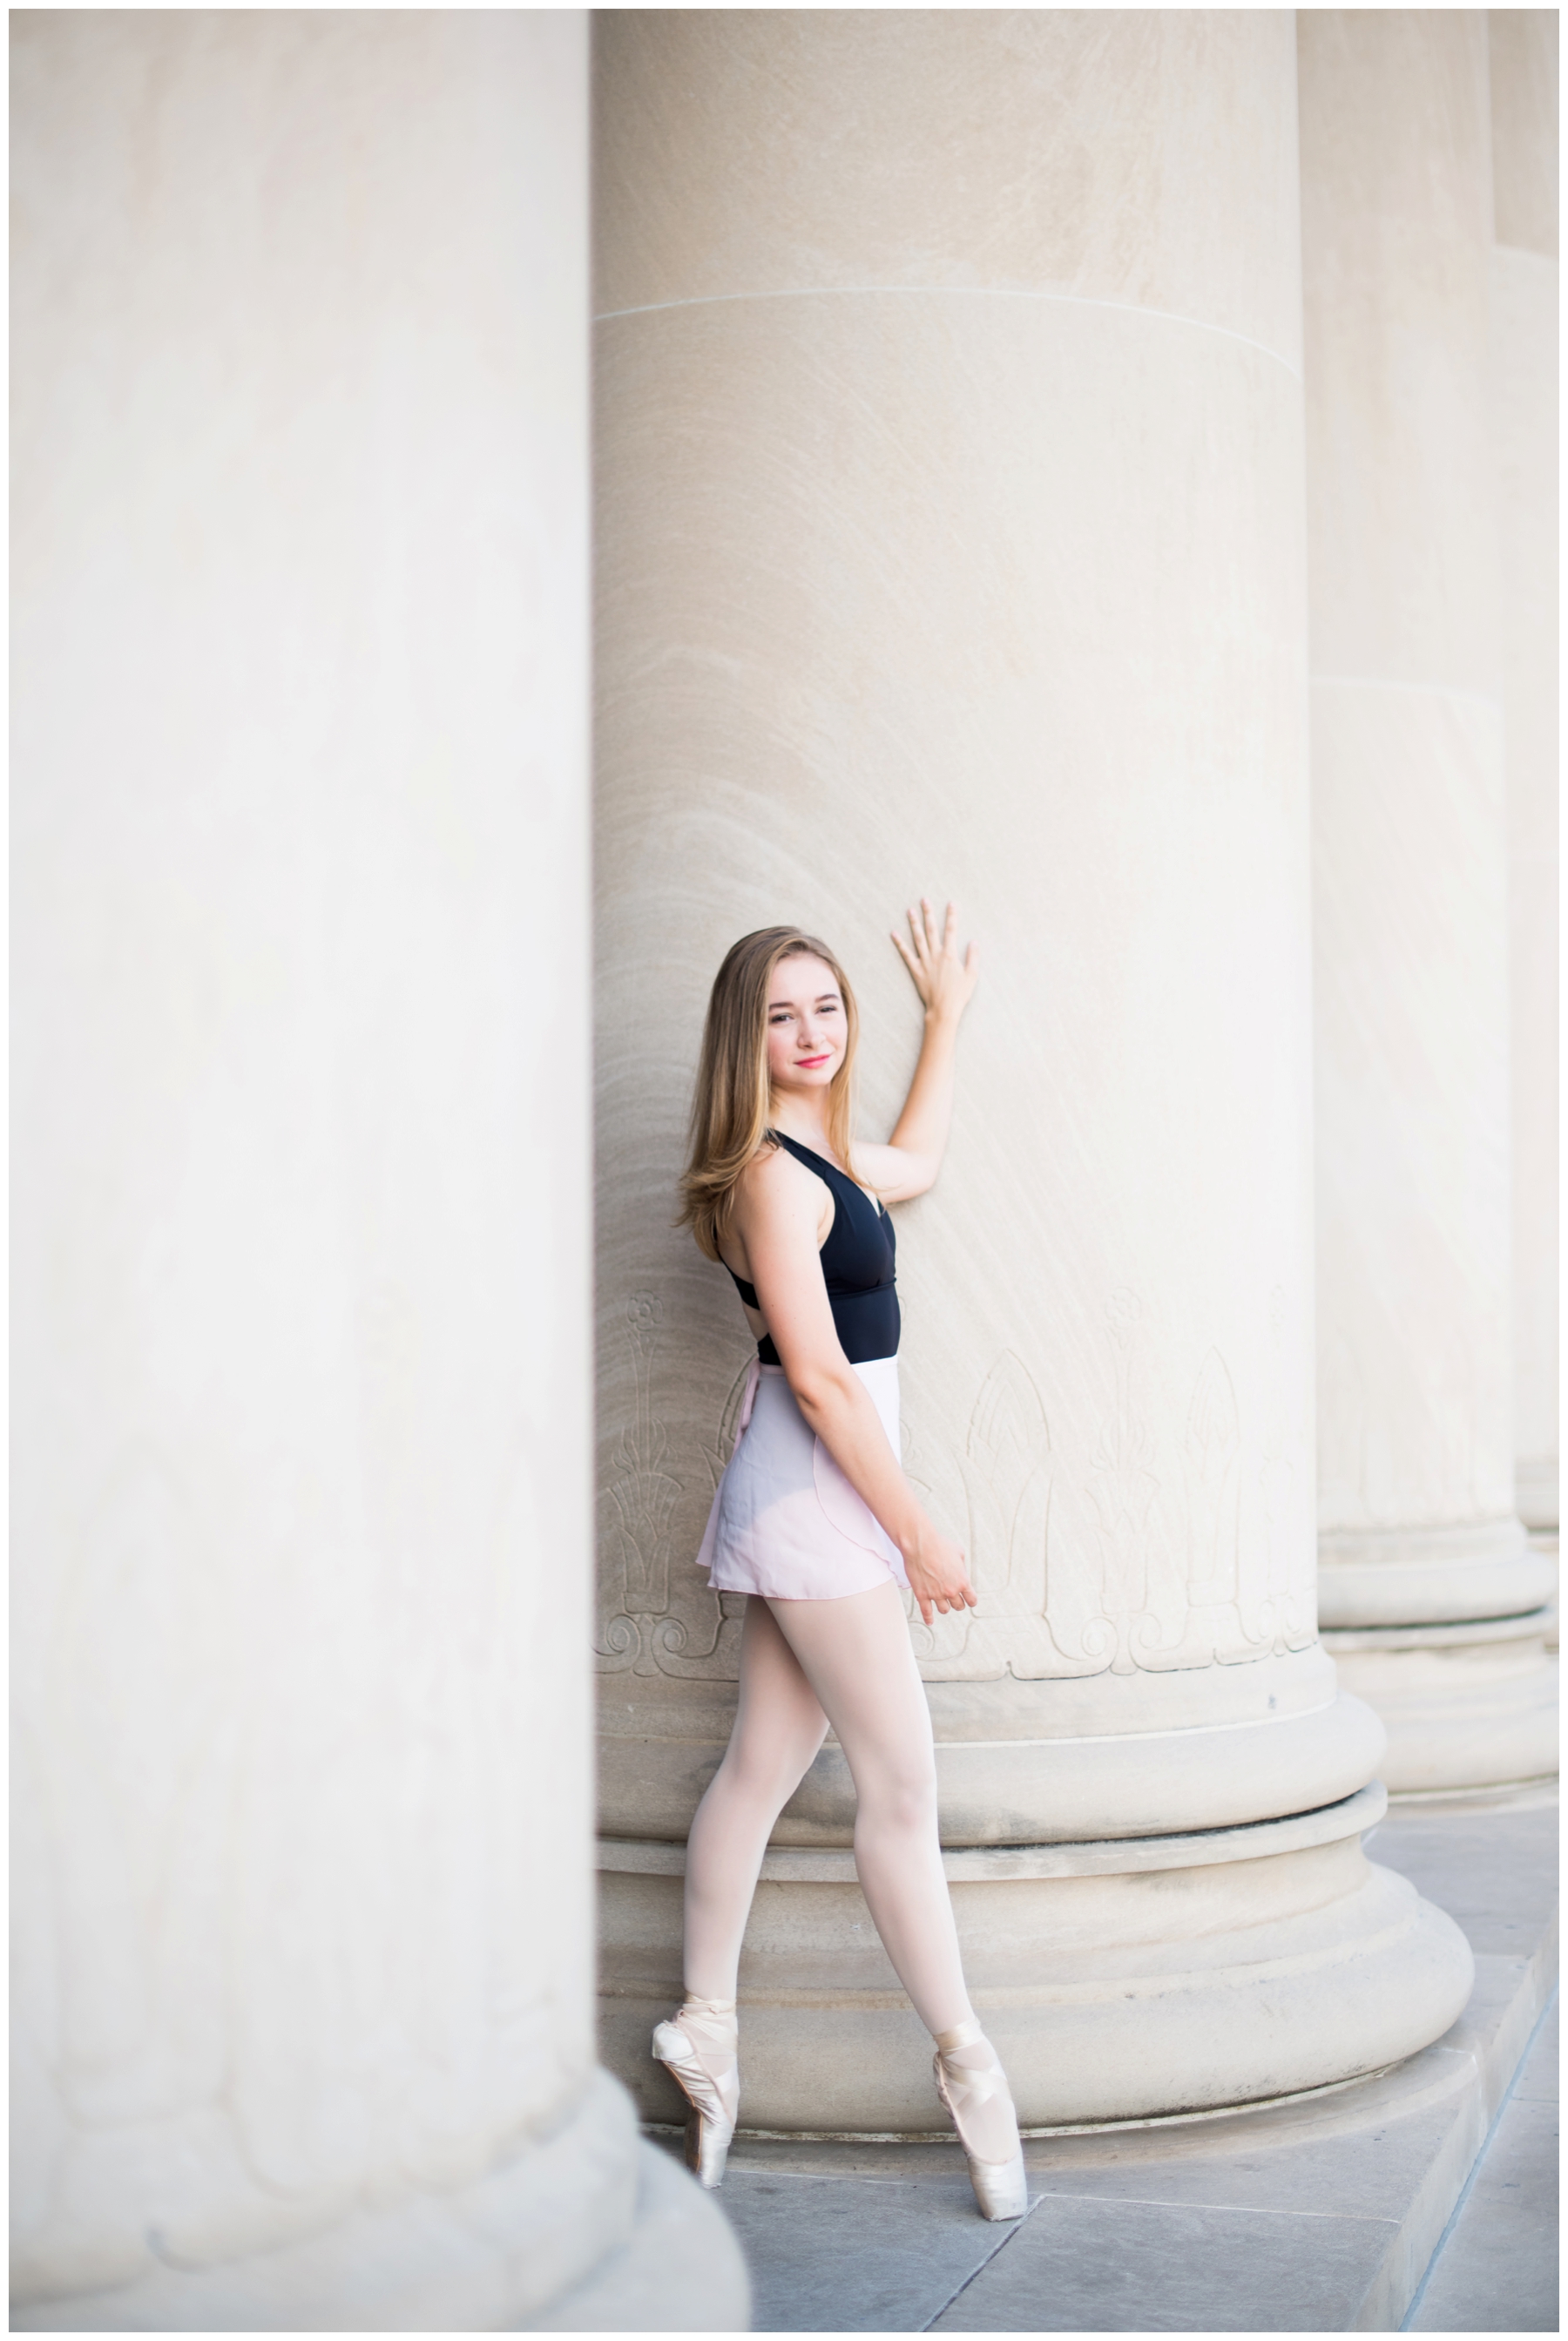 An elegant high school senior photo shoot in downtown kansas city at nelson atkins museum with modern dance and sunset lighting